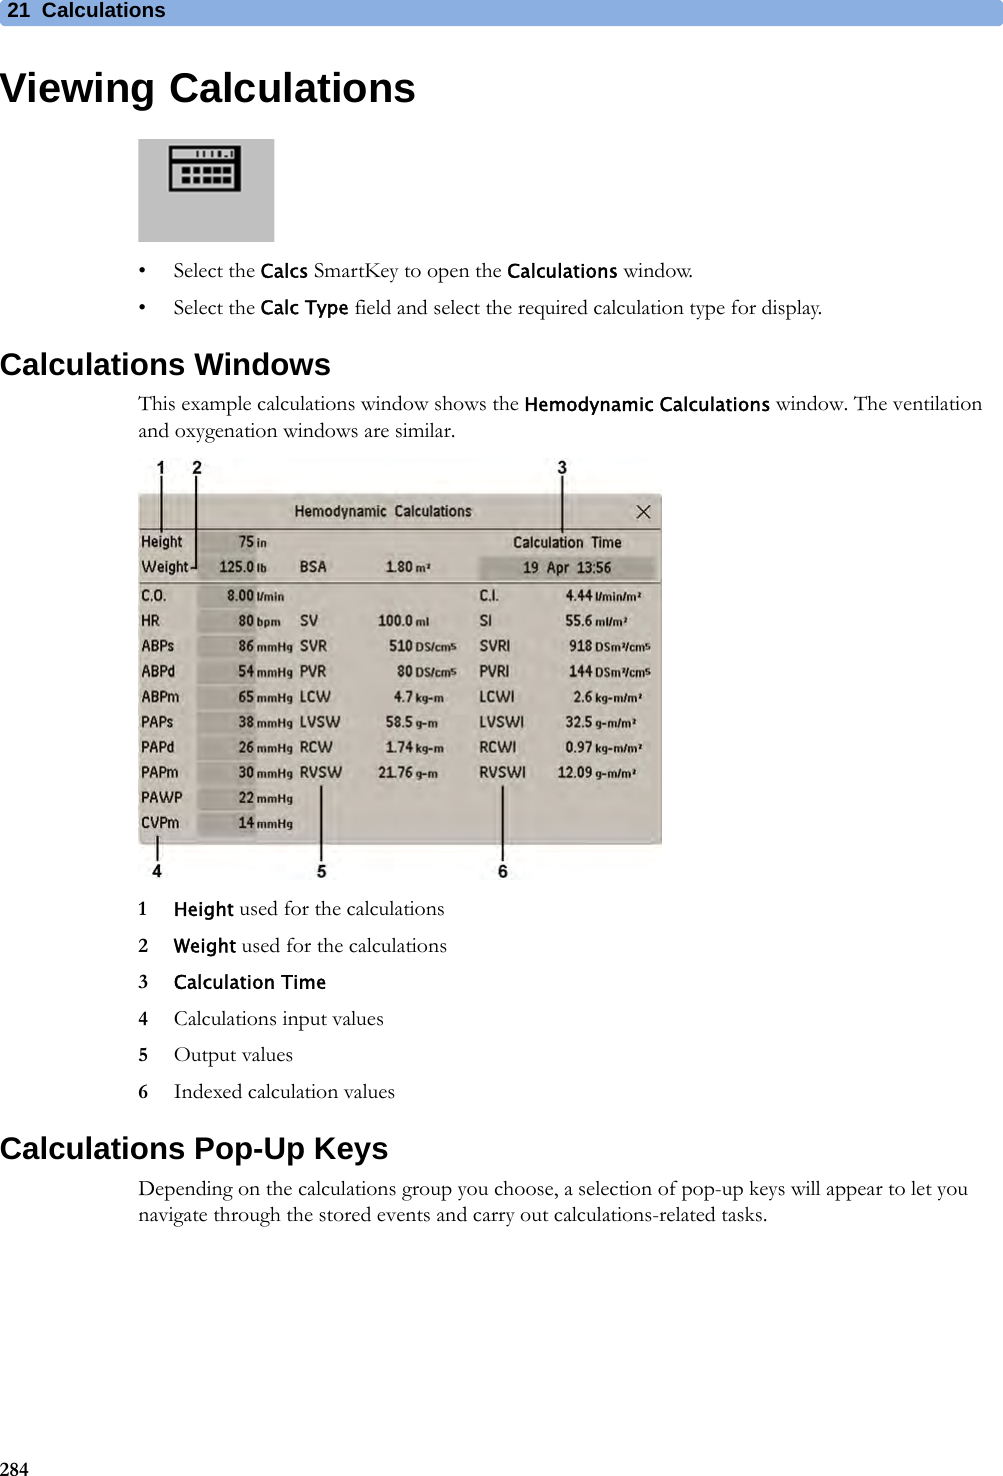 21 Calculations284Viewing Calculations• Select the Calcs SmartKey to open the Calculations window.• Select the Calc Type field and select the required calculation type for display.Calculations WindowsThis example calculations window shows the Hemodynamic Calculations window. The ventilation and oxygenation windows are similar.1Height used for the calculations2Weight used for the calculations3Calculation Time4Calculations input values5Output values6Indexed calculation valuesCalculations Pop-Up KeysDepending on the calculations group you choose, a selection of pop-up keys will appear to let you navigate through the stored events and carry out calculations-related tasks.